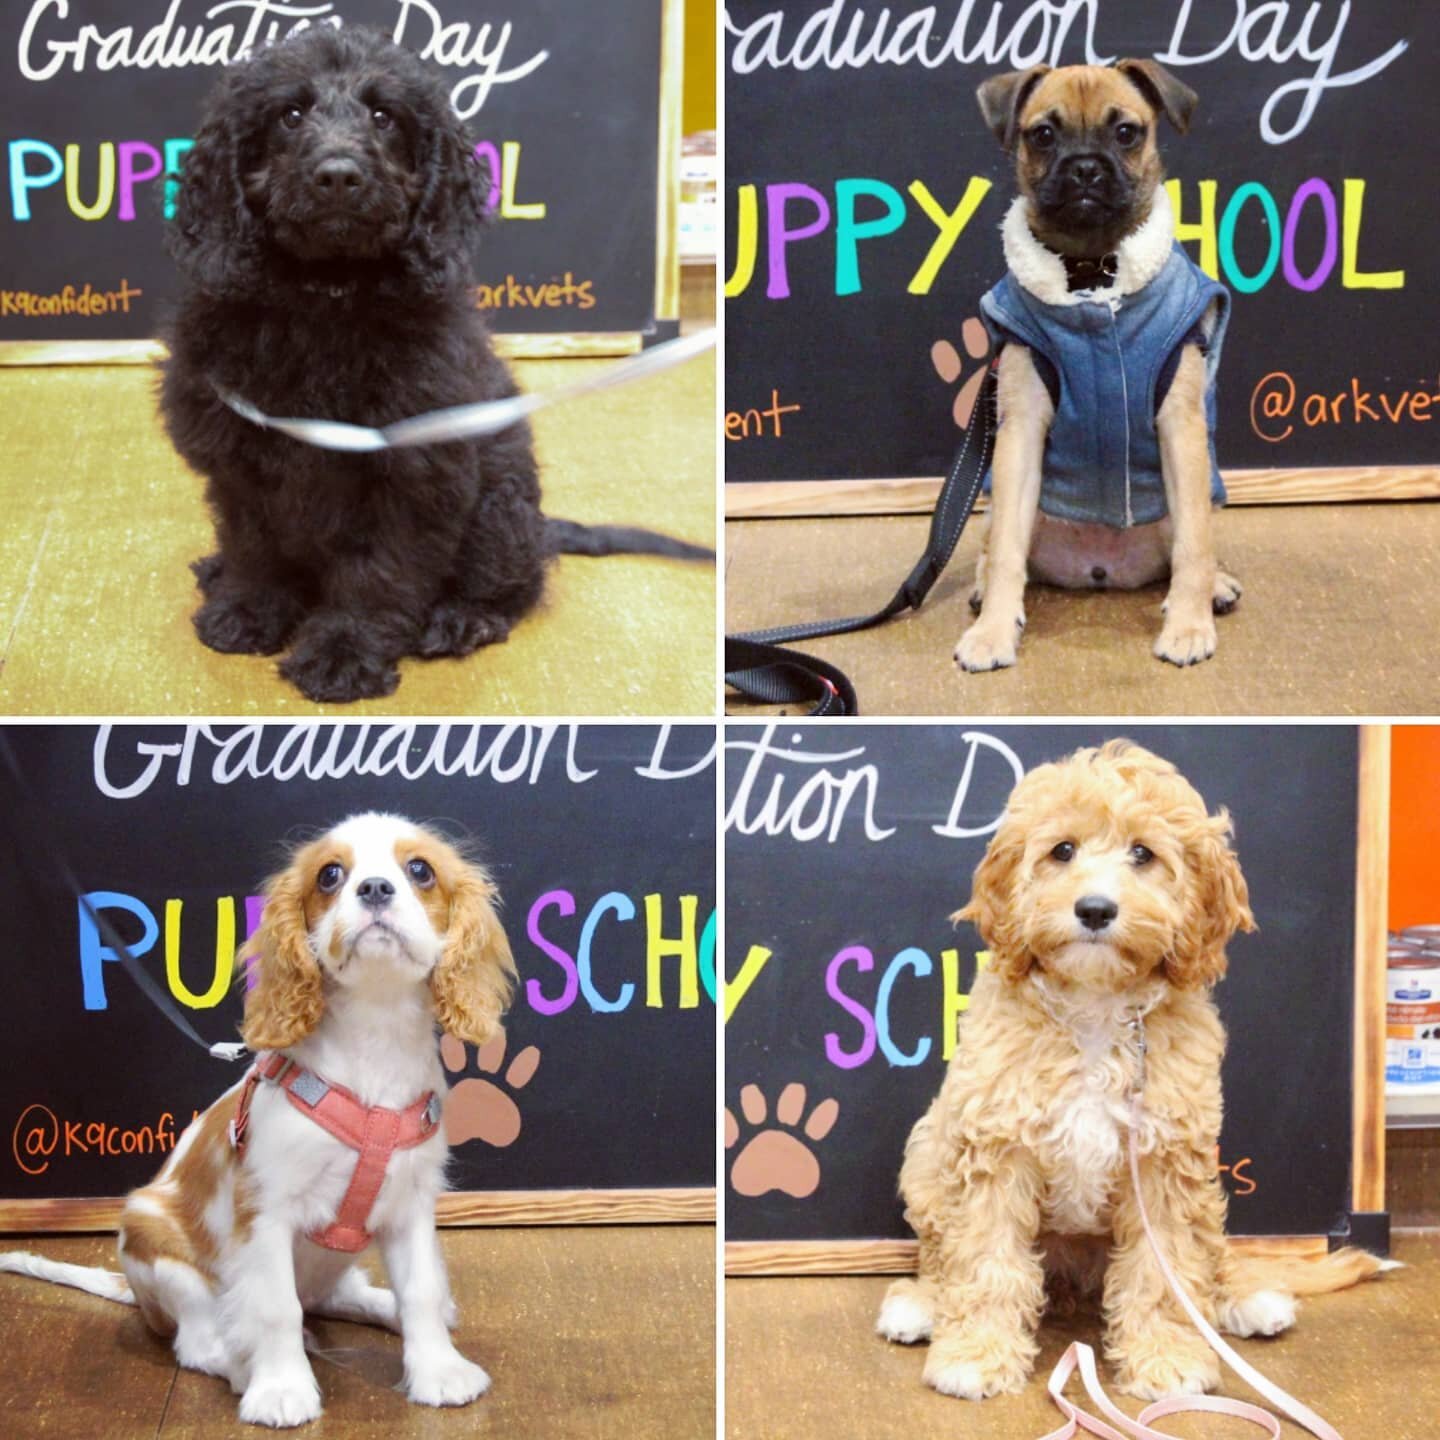 More super cute puppies from my Tuesday night class! Well done to Alfie, Rosie, YY and Nala - it's been such fun hanging out with you all! @arkvets #puppies #puppytraining #puppyclass #puppyschool #dogtraining #positivereinforcement #positivedogtrain